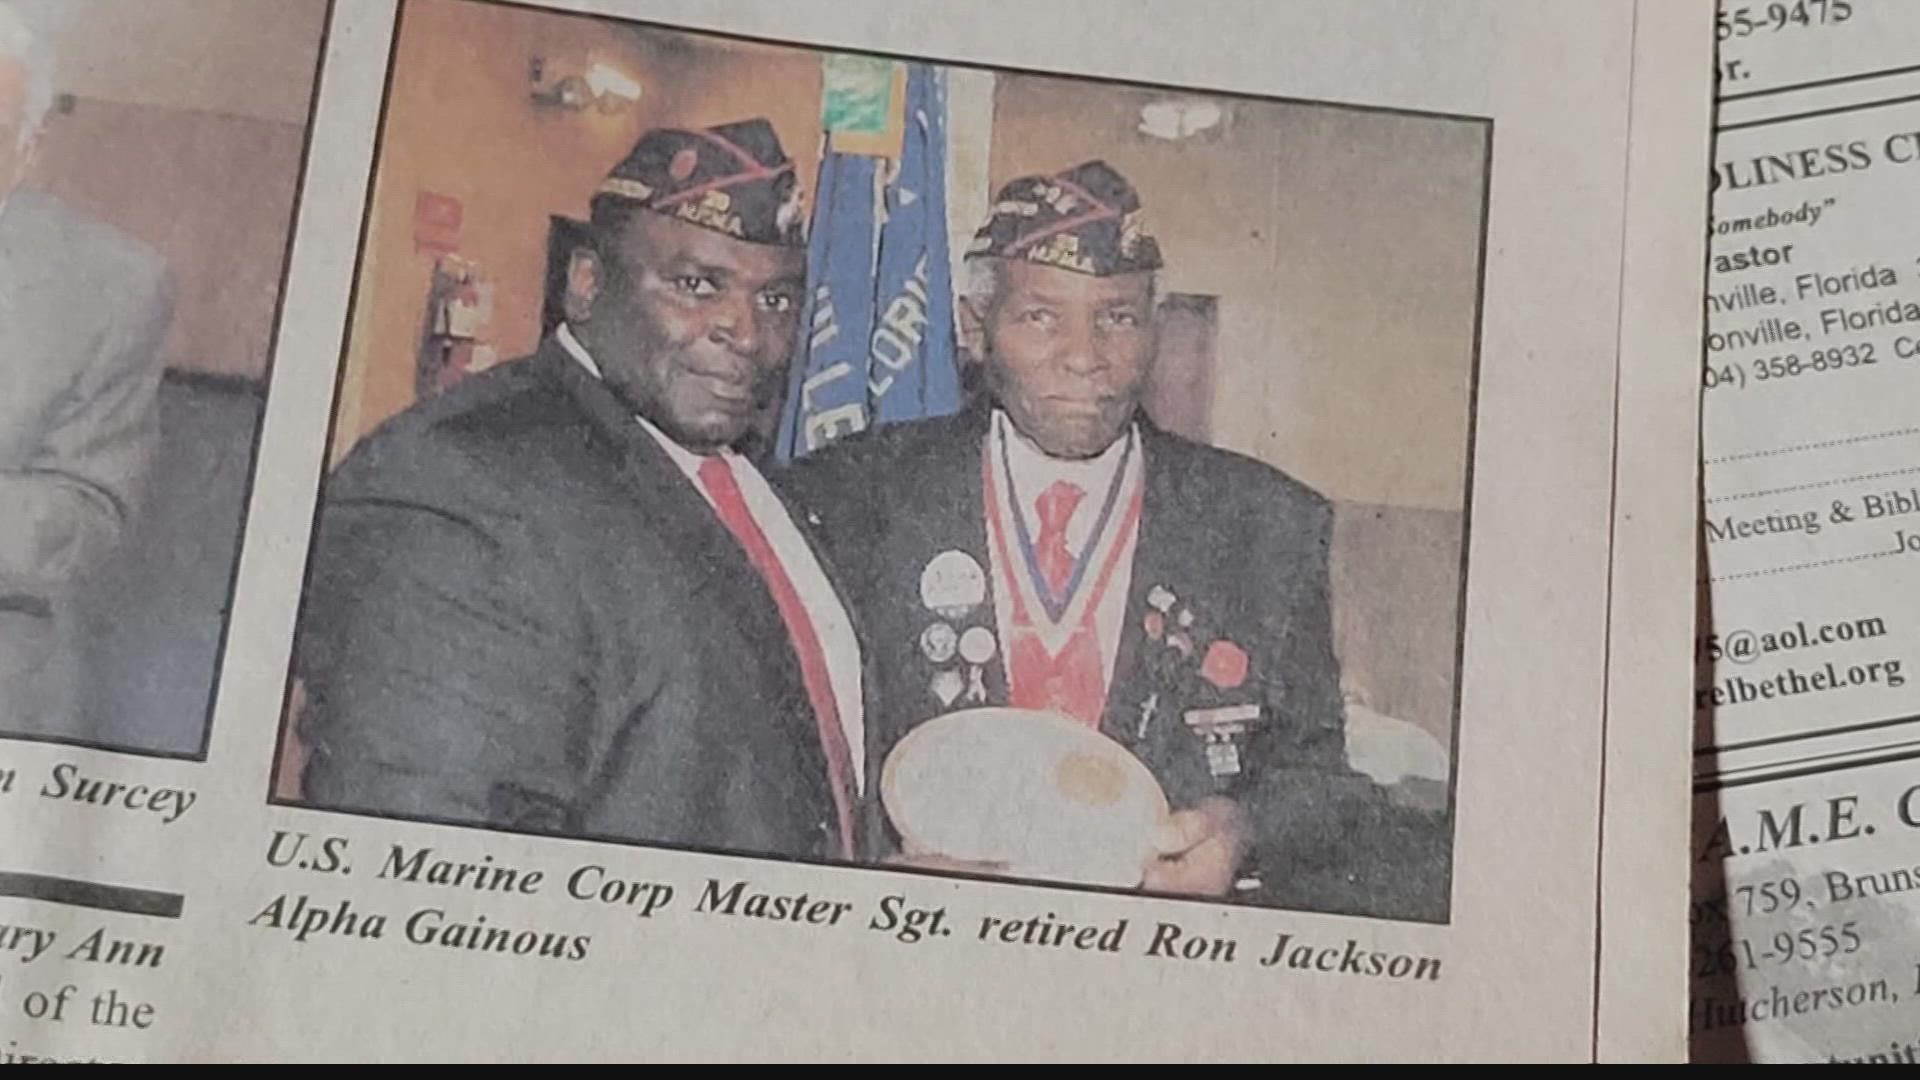 Alpha Gainous, one of the first Black marines, recently died at the age of 98 in Jacksonville.